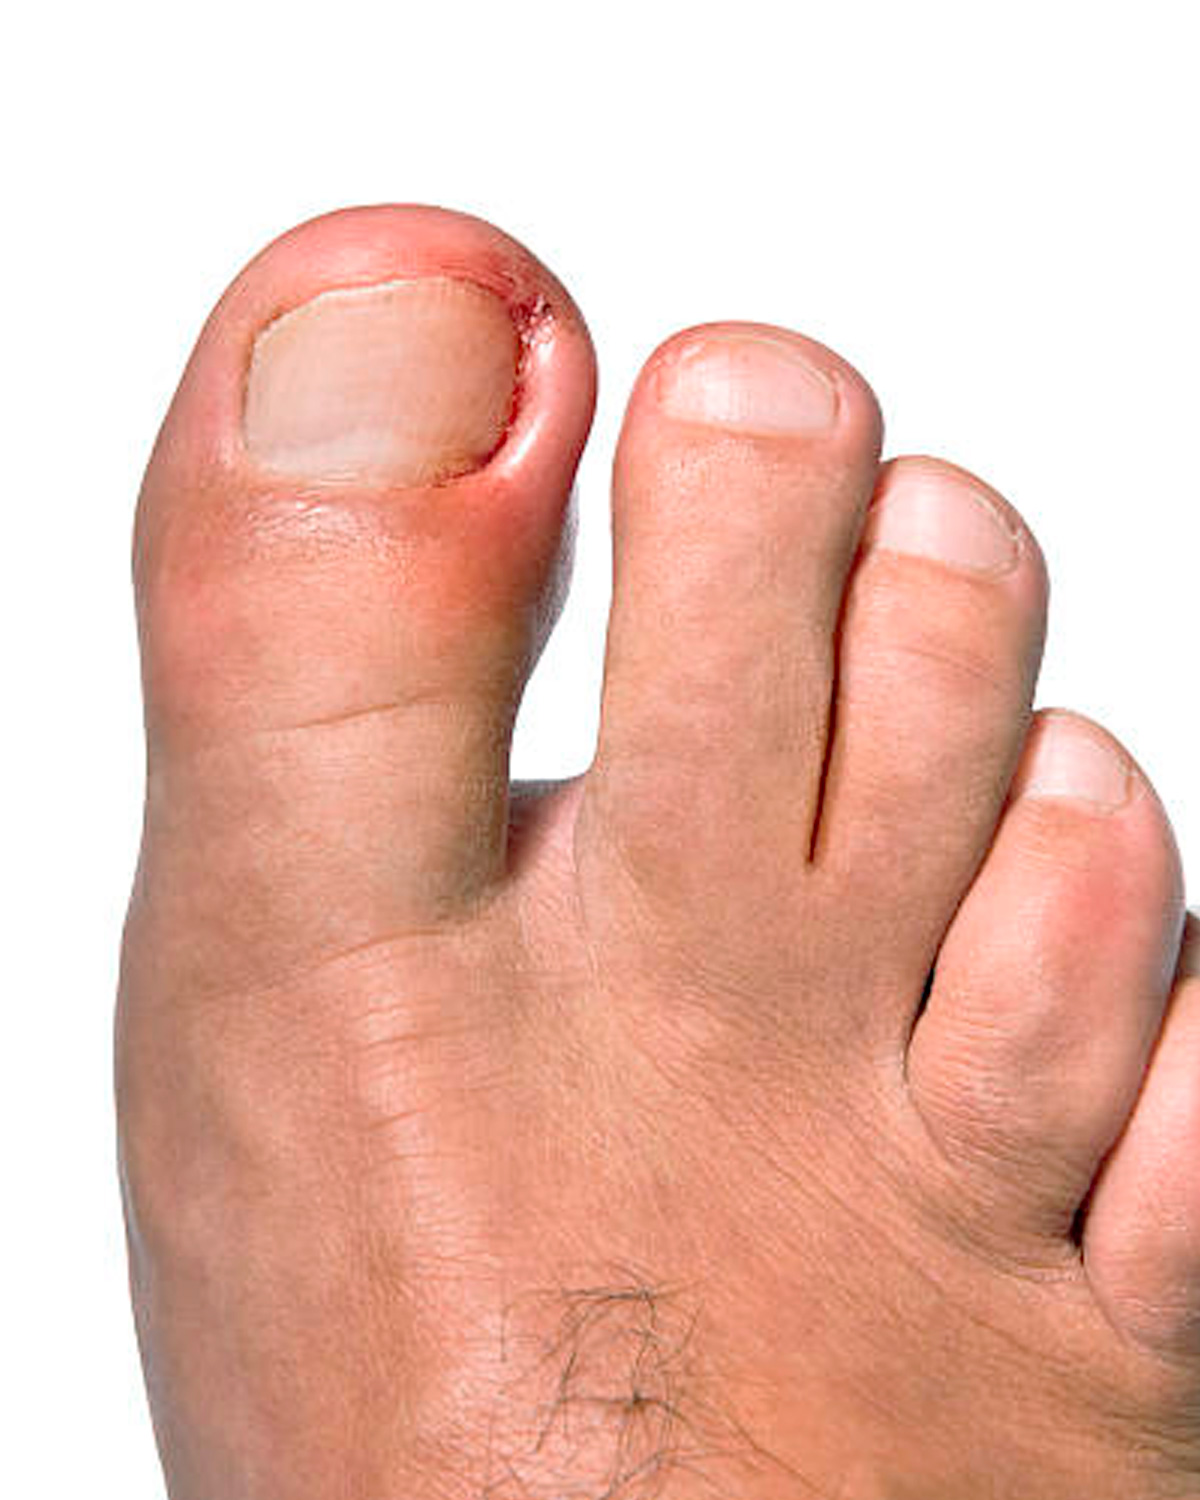 Fungal Nails - The Foot People